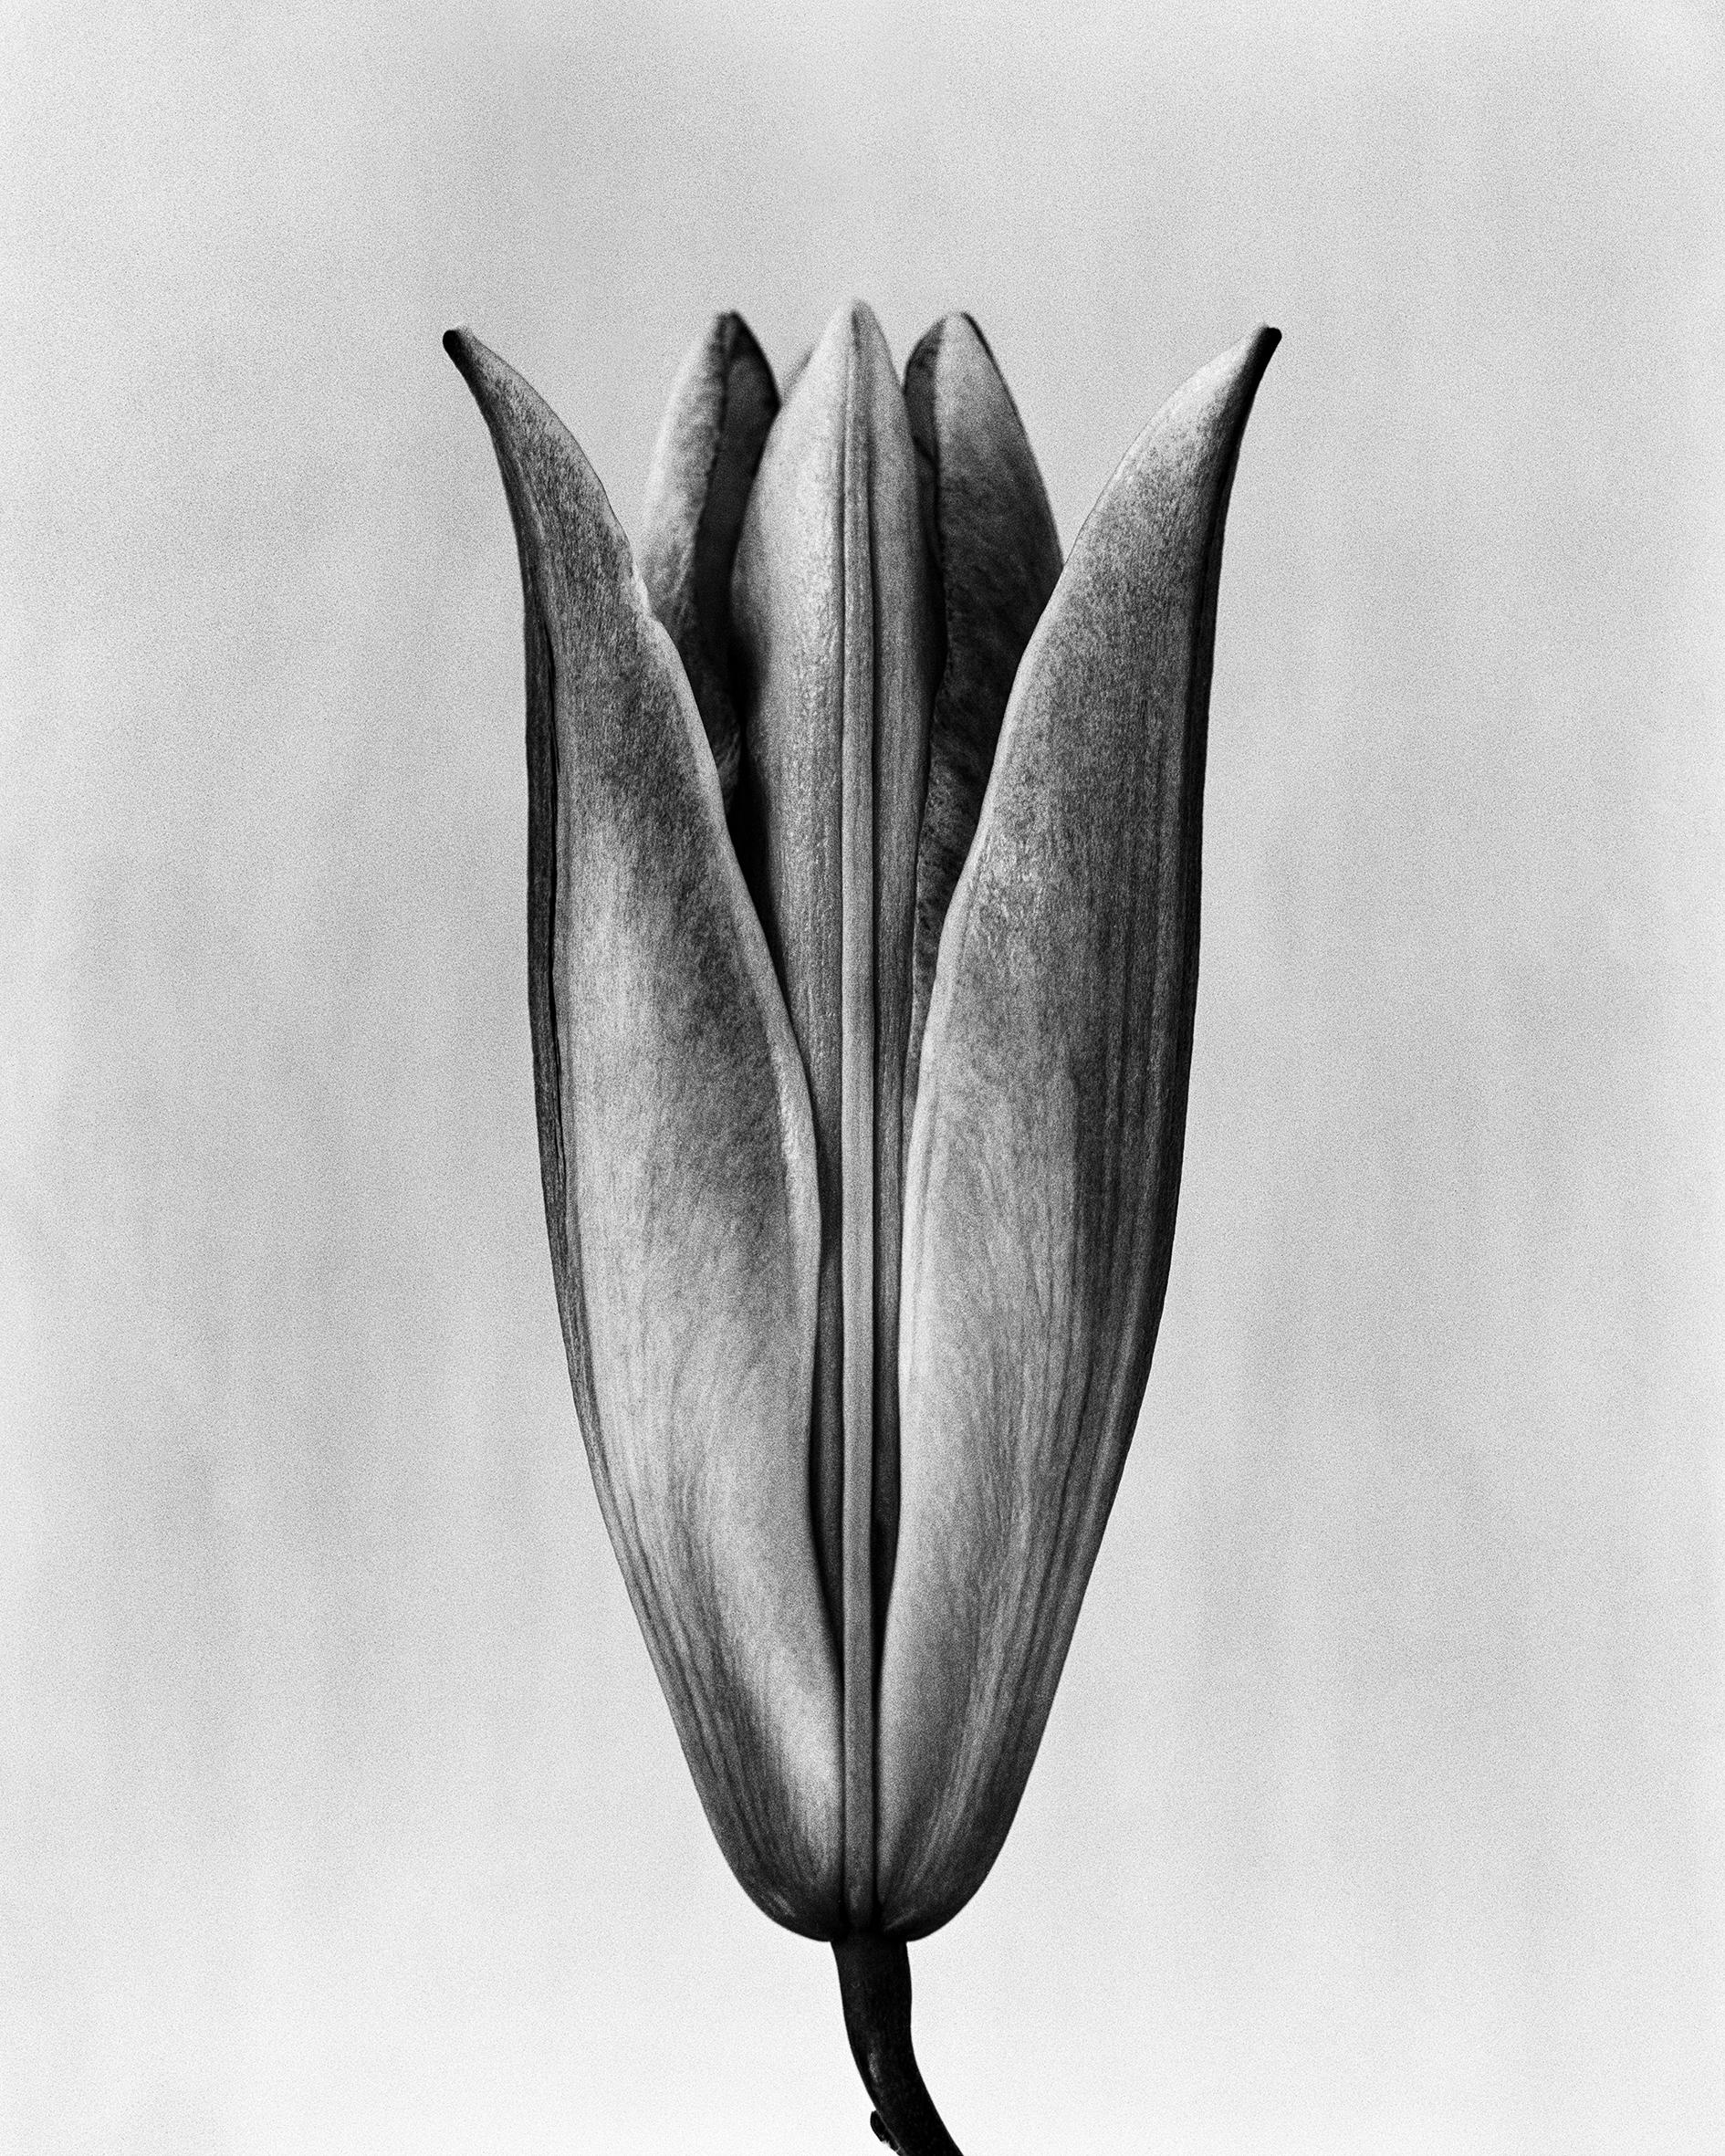 Lily '23 black and white analogue floral photography edition of 10